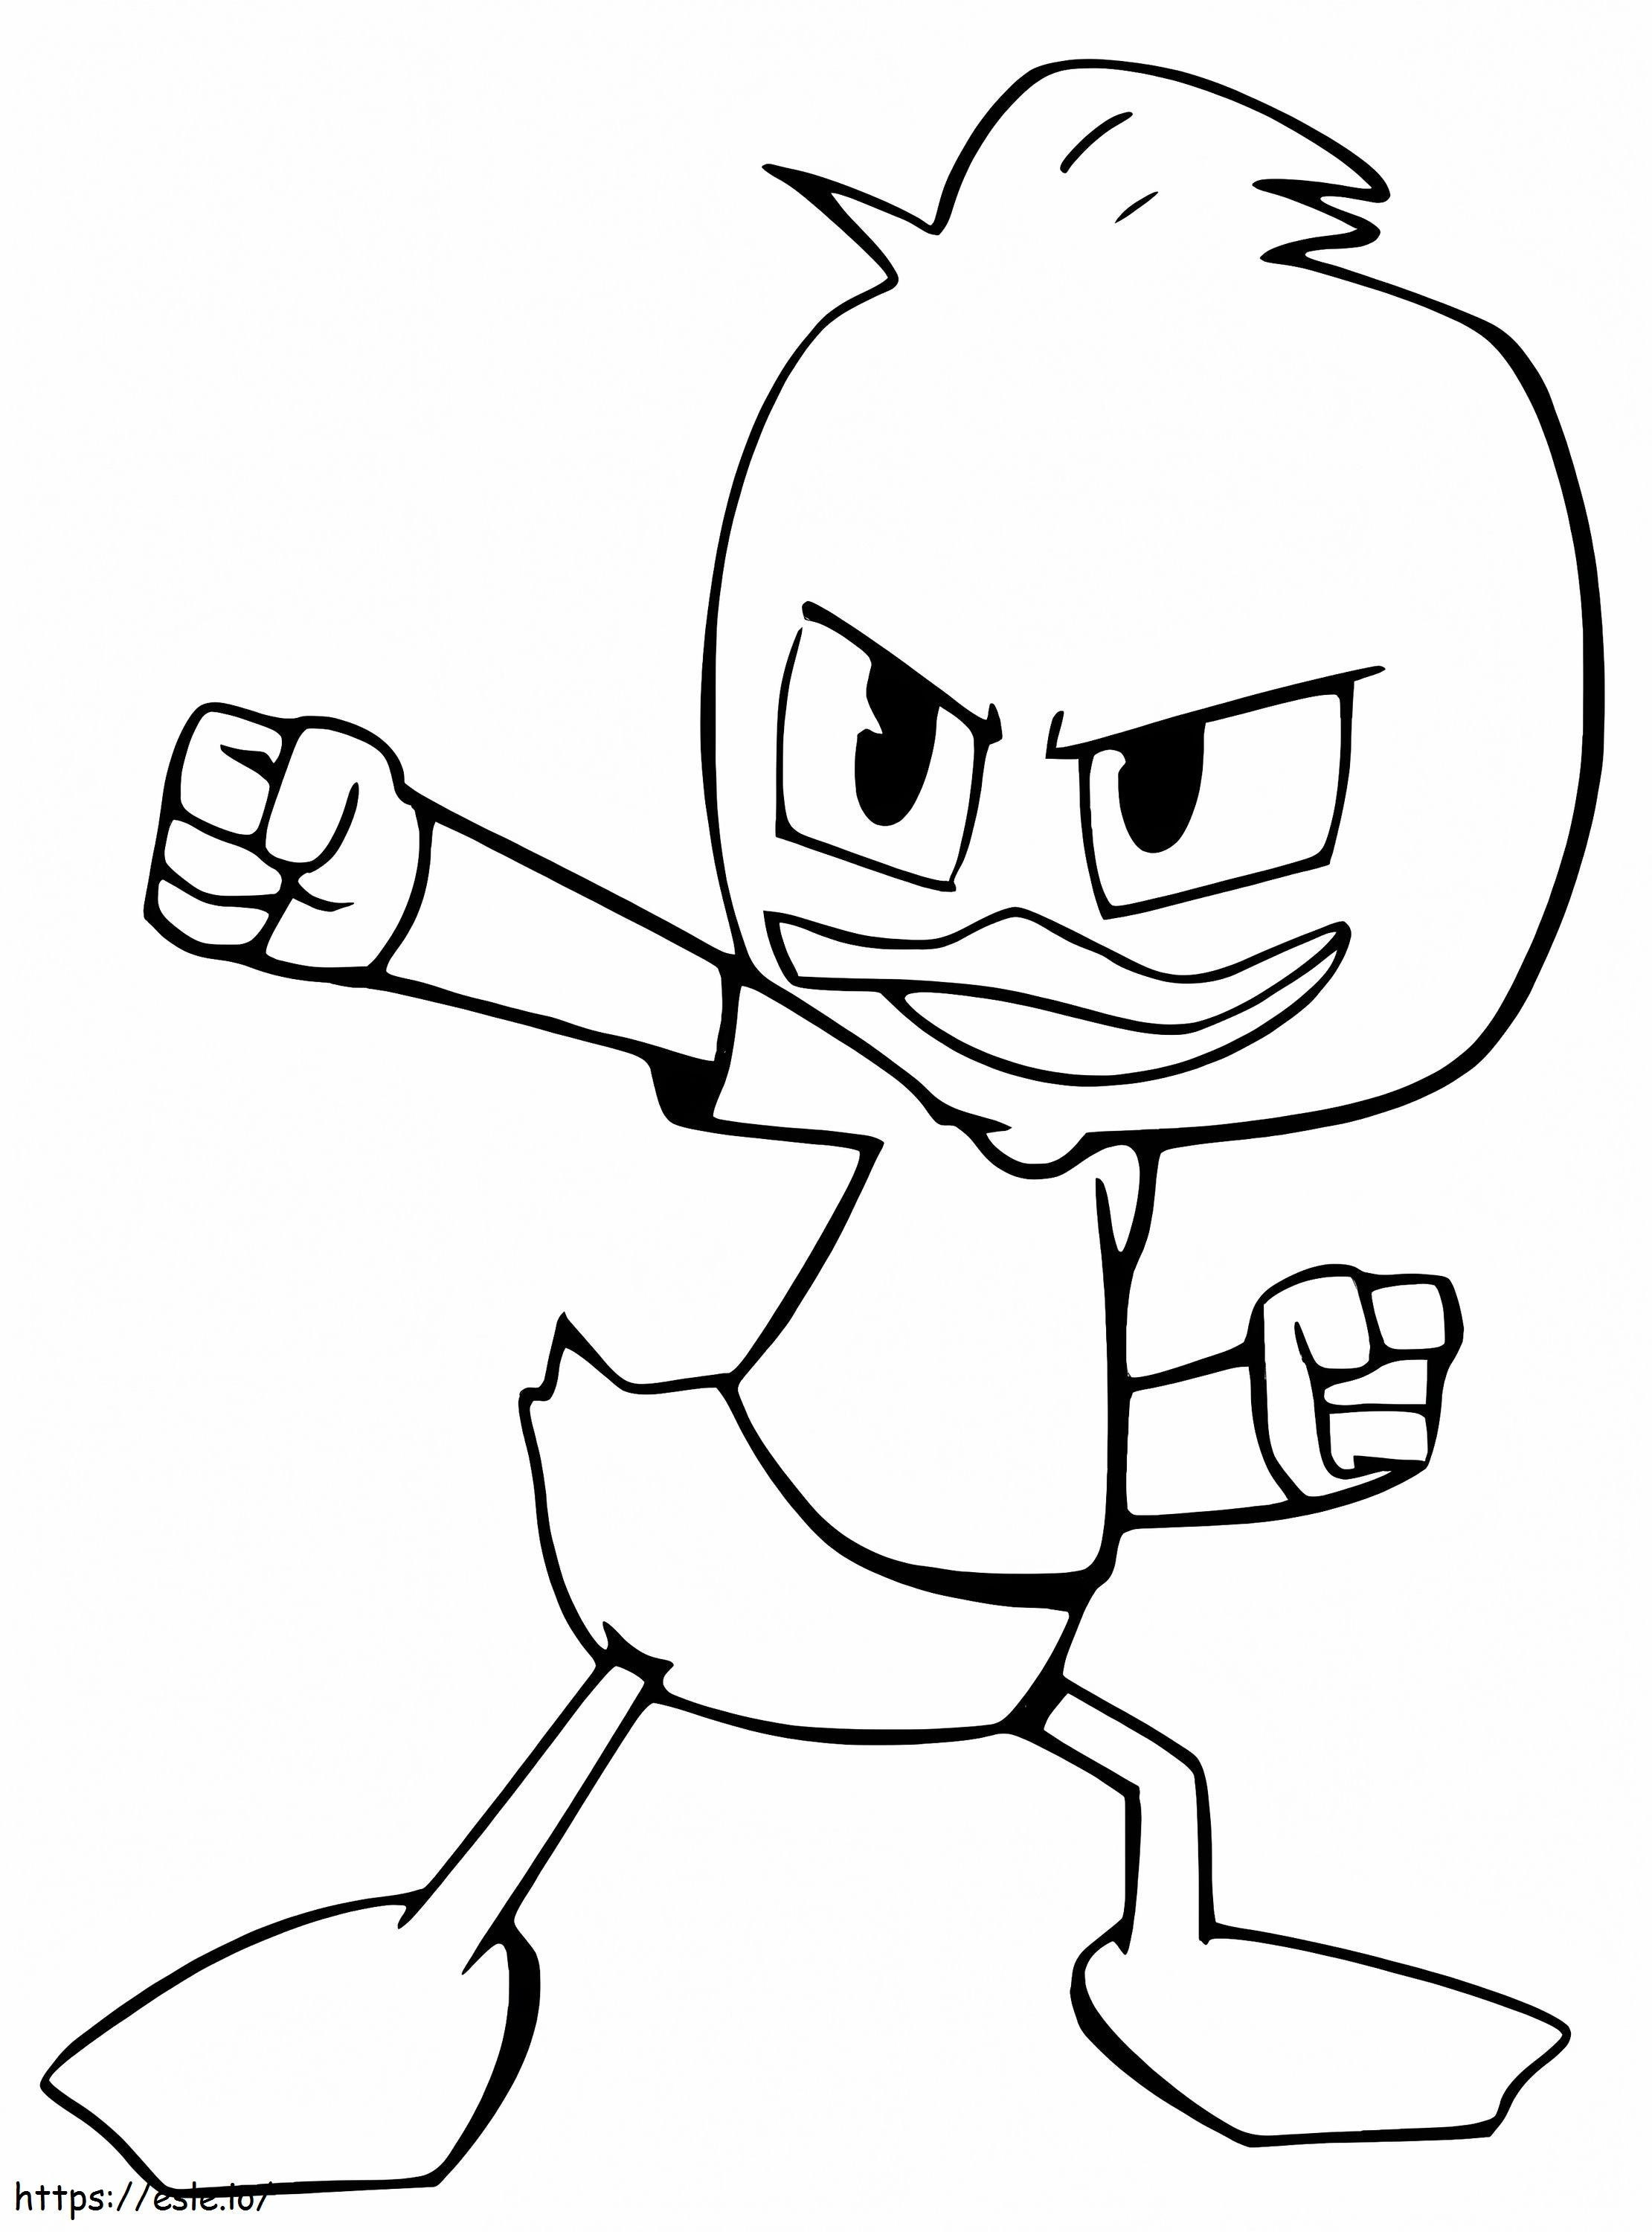 Dewey Duck From Ducktales coloring page